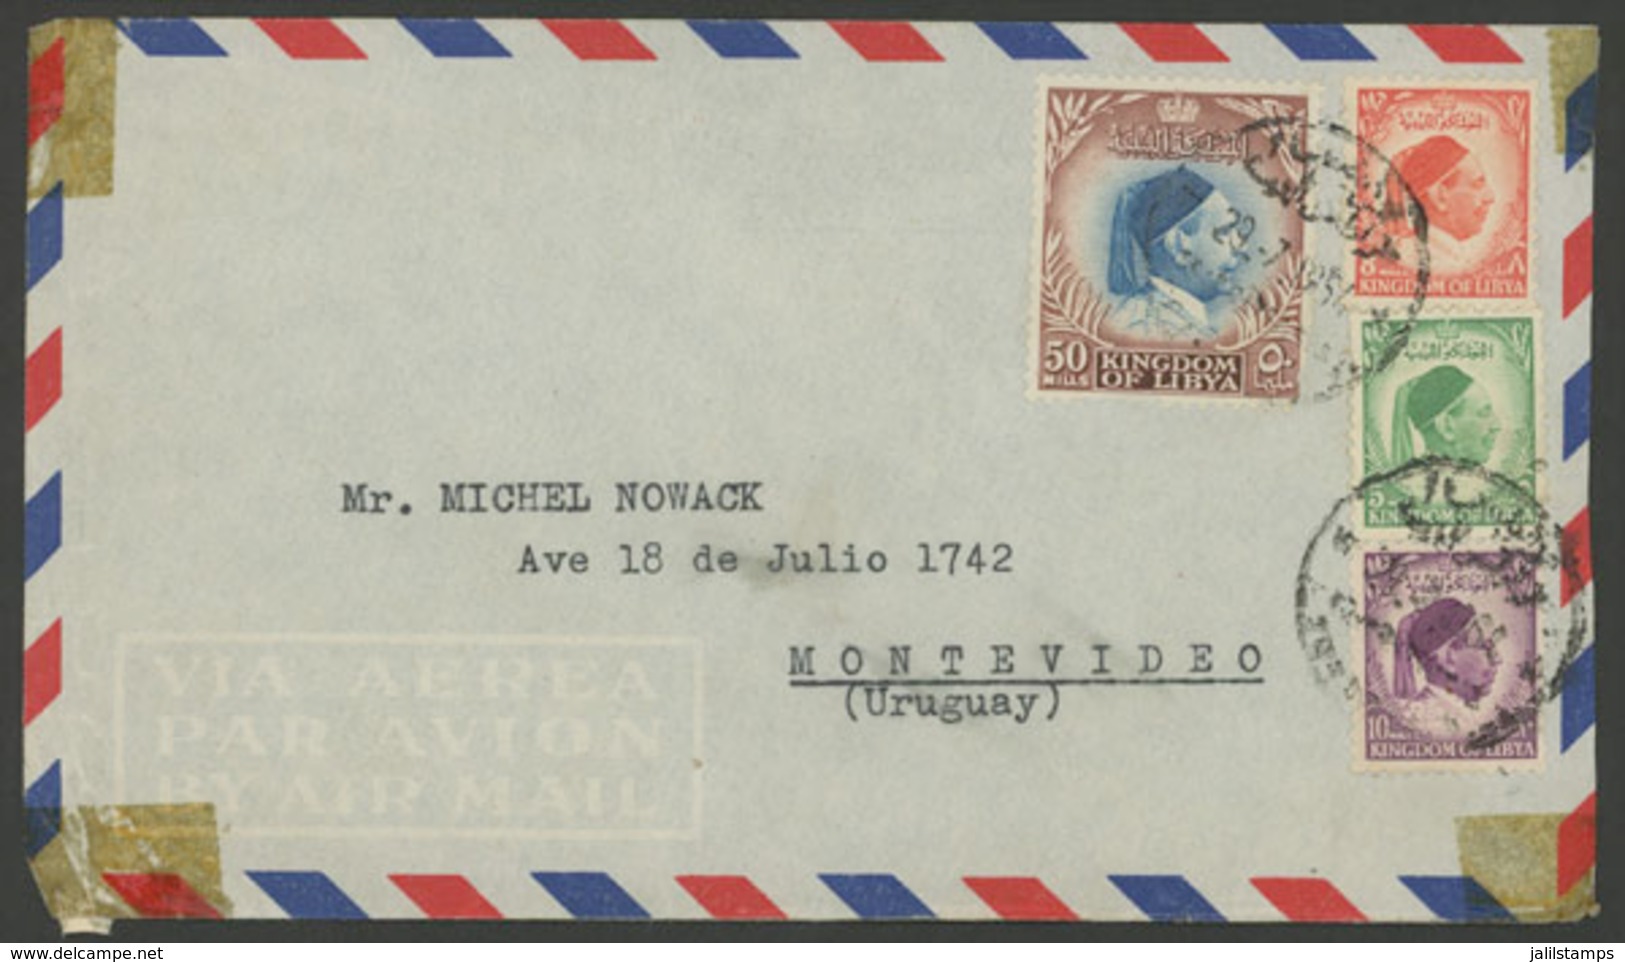 1011 LIBYA: Airmail Cover Sent To Montevideo (Uruguay) On 29/JUL/1954 With Nice Posta - Libia